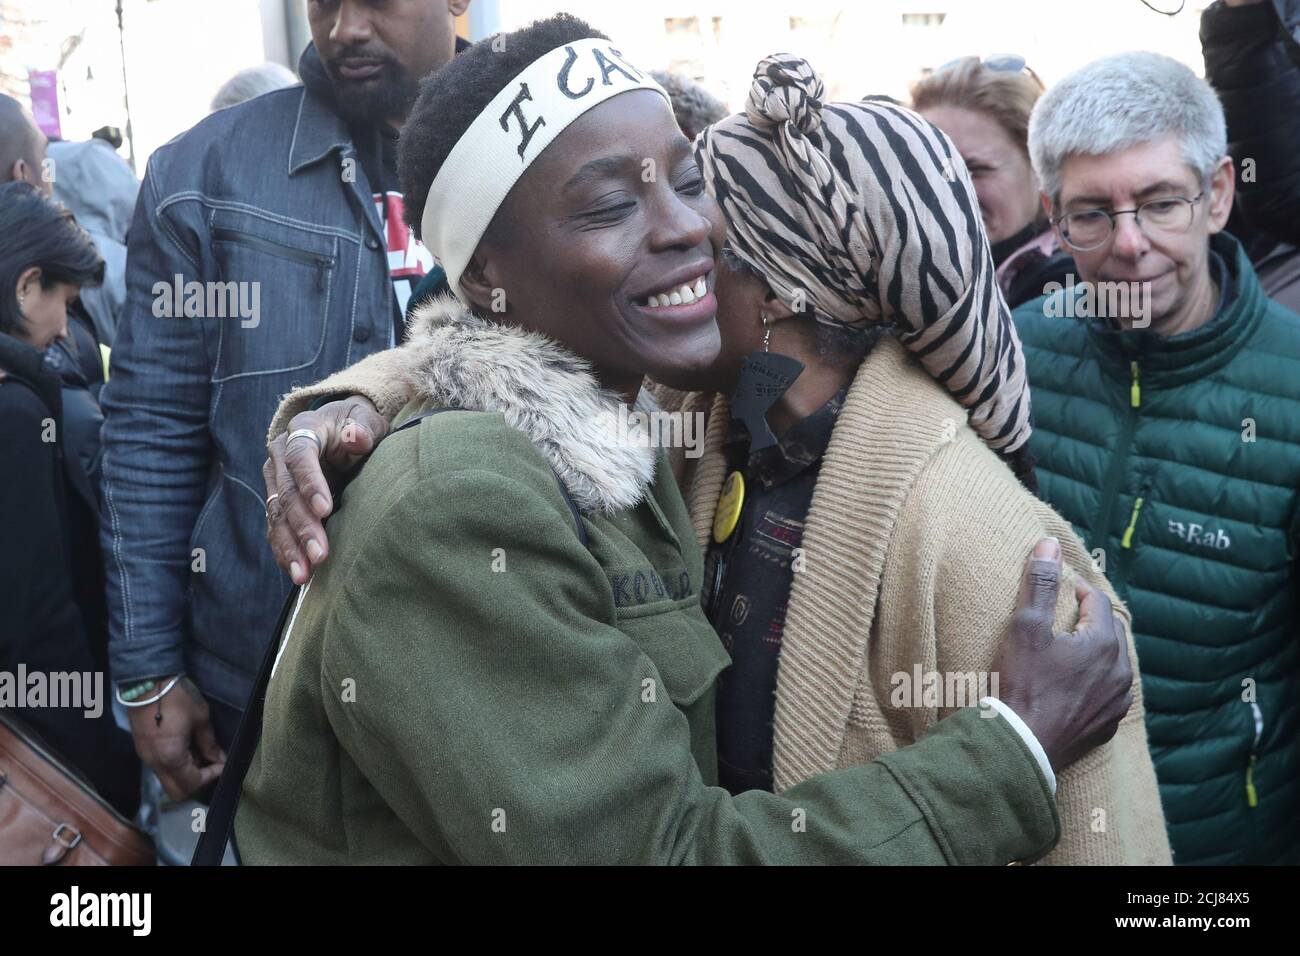 Therese Patricia Okoumou is embraced after her sentencing for conviction on attempted scaling of the Statue of Liberty to protest the U.S. immigration policy, outside a federal court in New York, U.S., March 19, 2019. REUTERS/Shannon Stapleton Stock Photo